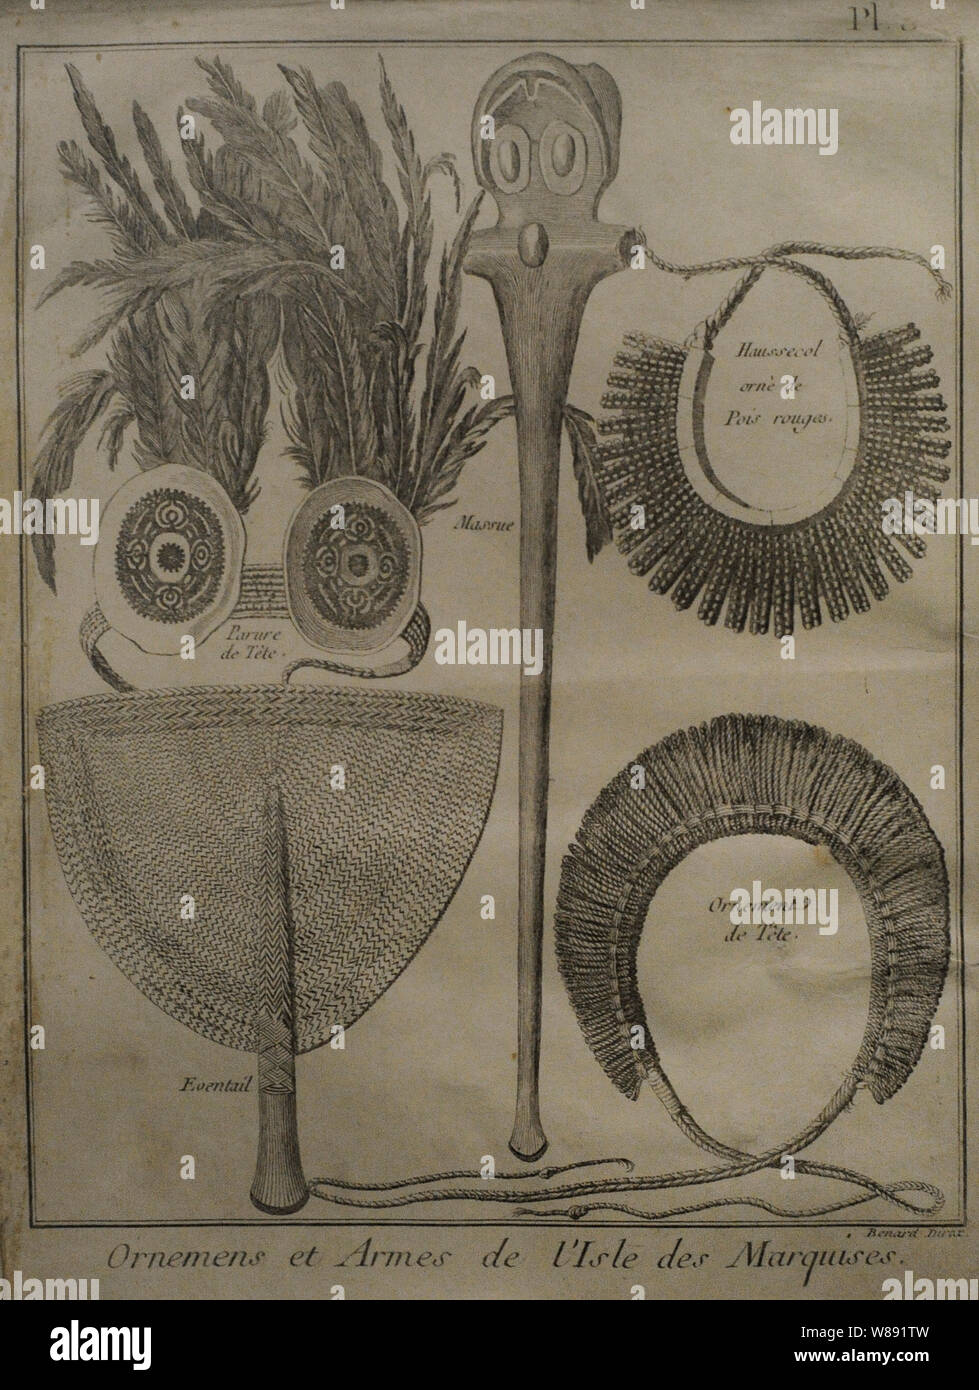 Ornaments and weapons of the Marquesas Islands. Engraving depicting decorative objects from the Marquesas Islands, visited by James Cook during his second Voyage of Discovery in the South Seas in 1774. It was engraved by Robert Benard (1734-1777), after William Hodges, and was published in the 1778 French edition of Captain James Cook 2nd Voyage of Discovery to the South Seas. A voyage towards the South Pole, and round the World. The five objects depicted are: headdress of feathers, fibre and shells, woven fan, ornamental club, neck dress with red seeds and headdress of woven fibre. Stock Photo